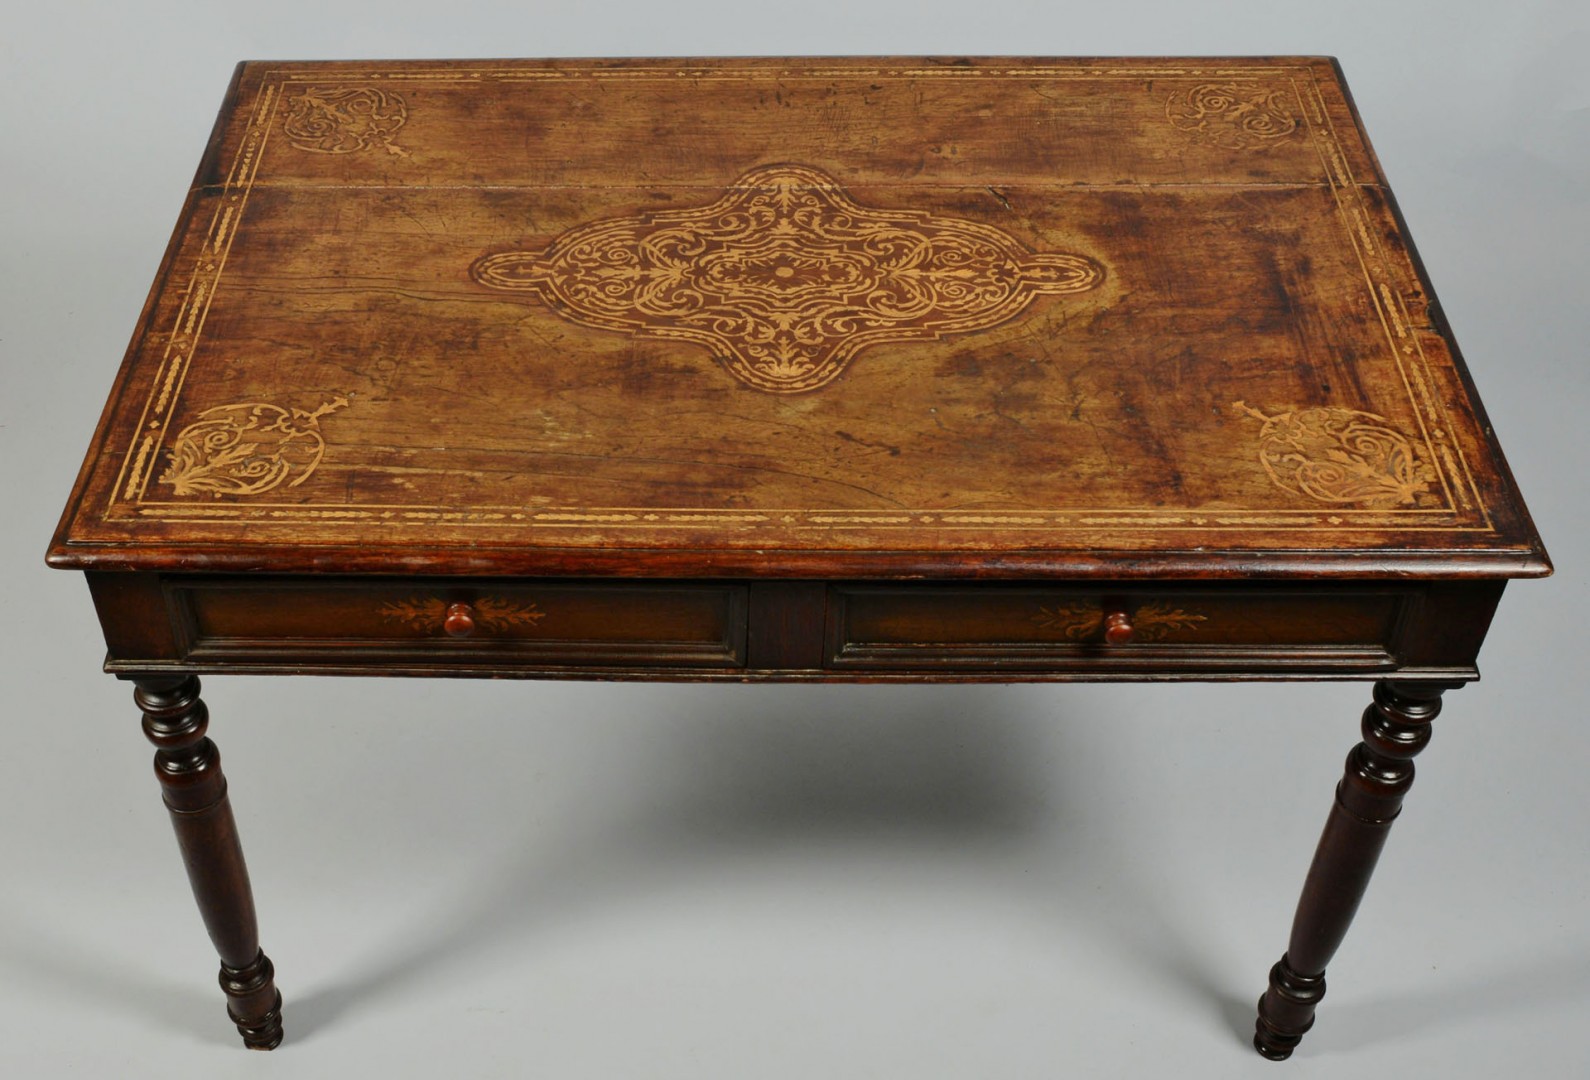 Lot 344: Continental inlaid writing table or desk